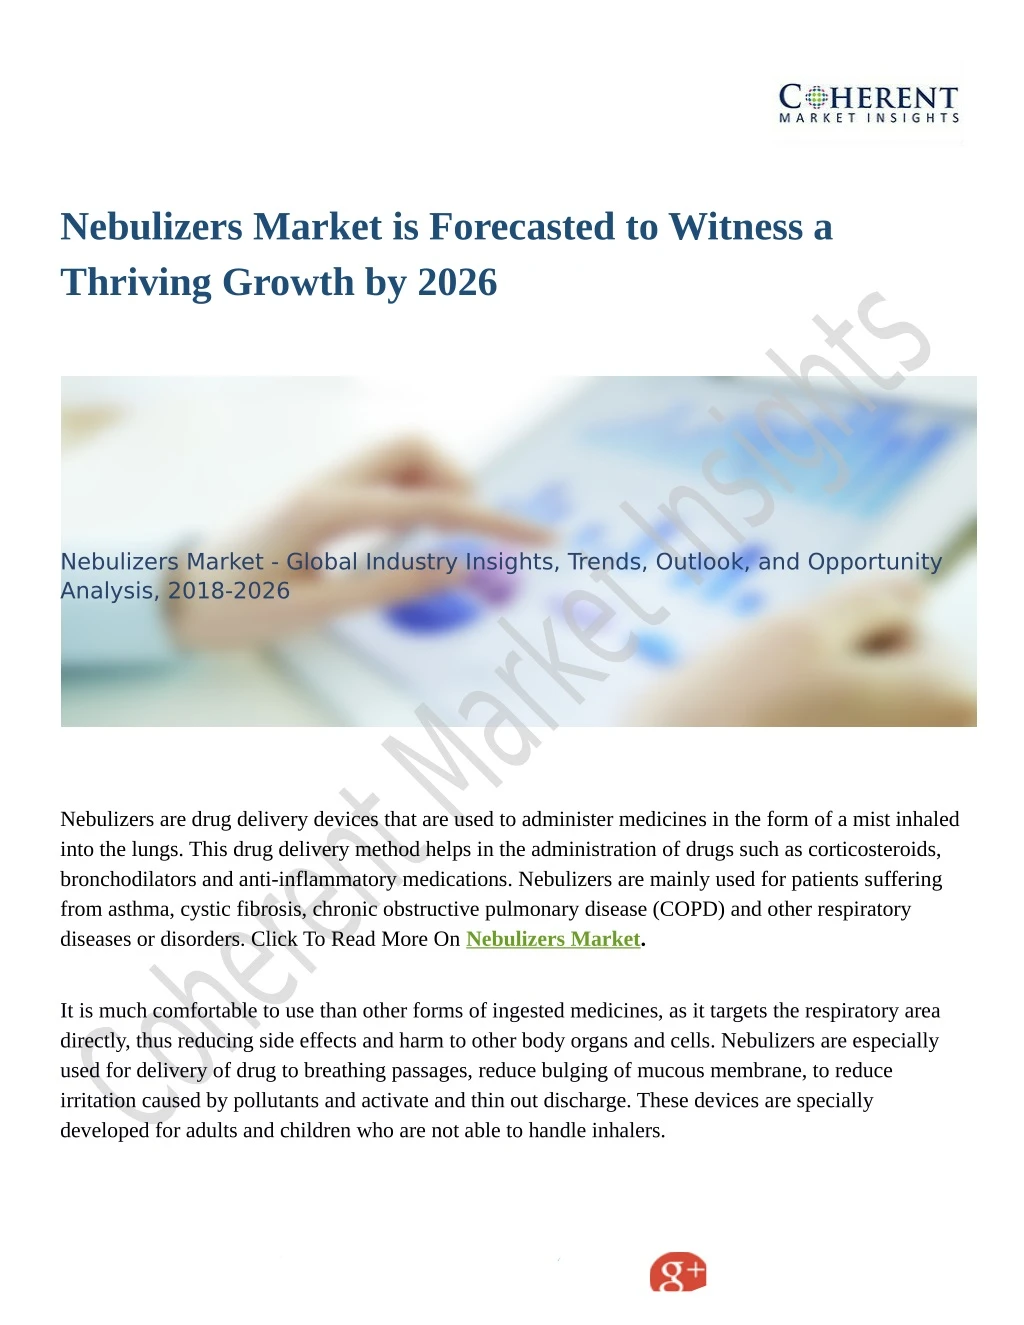 nebulizers market is forecasted to witness